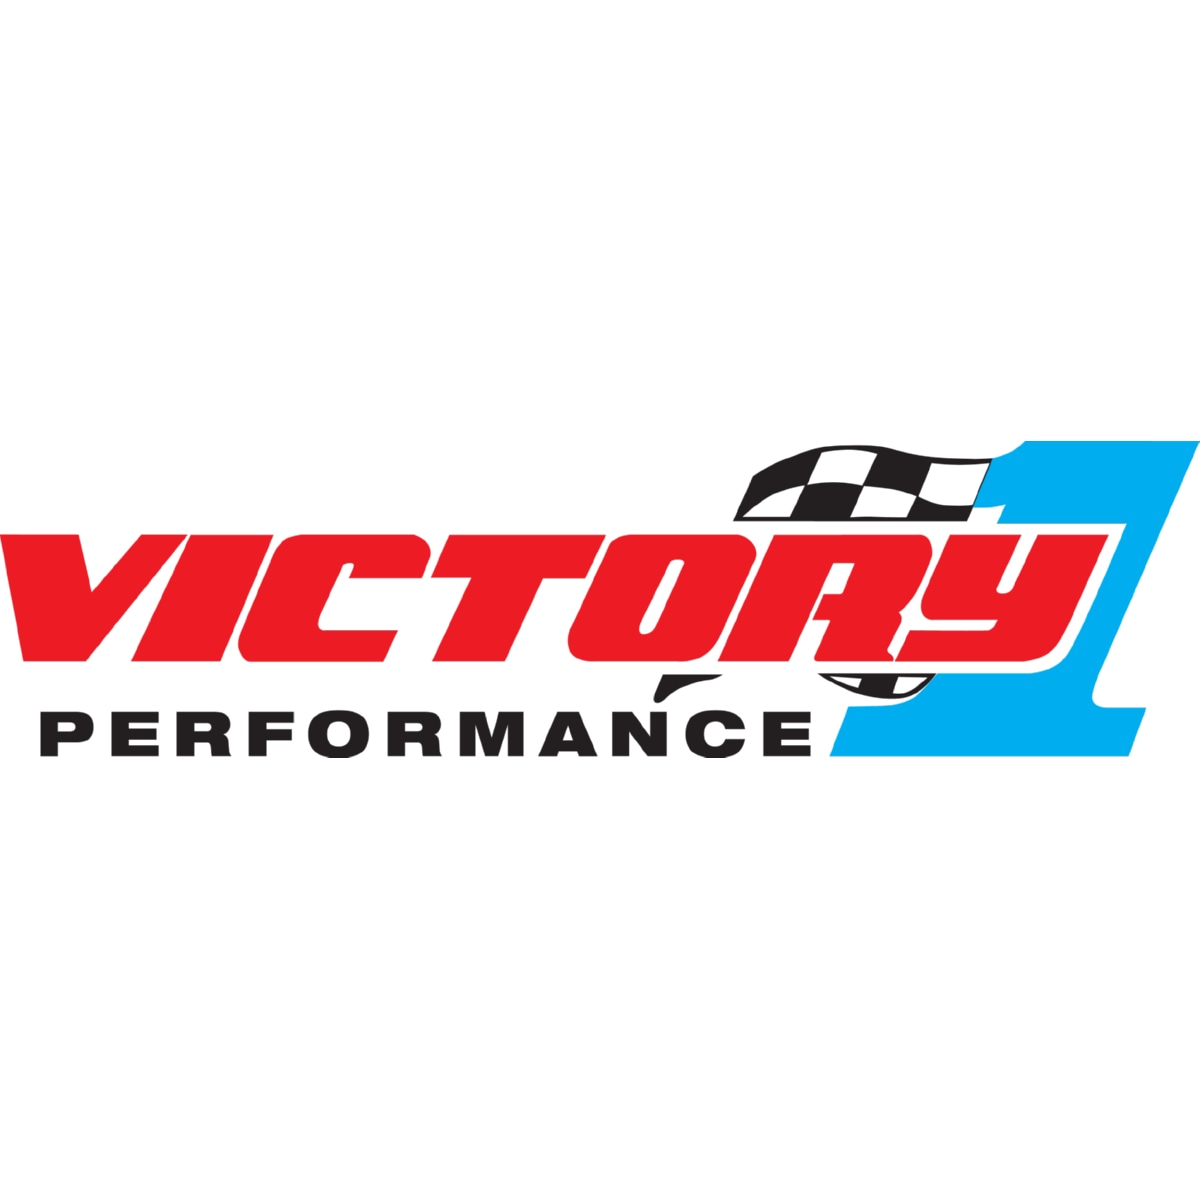 Victory 1 Performance